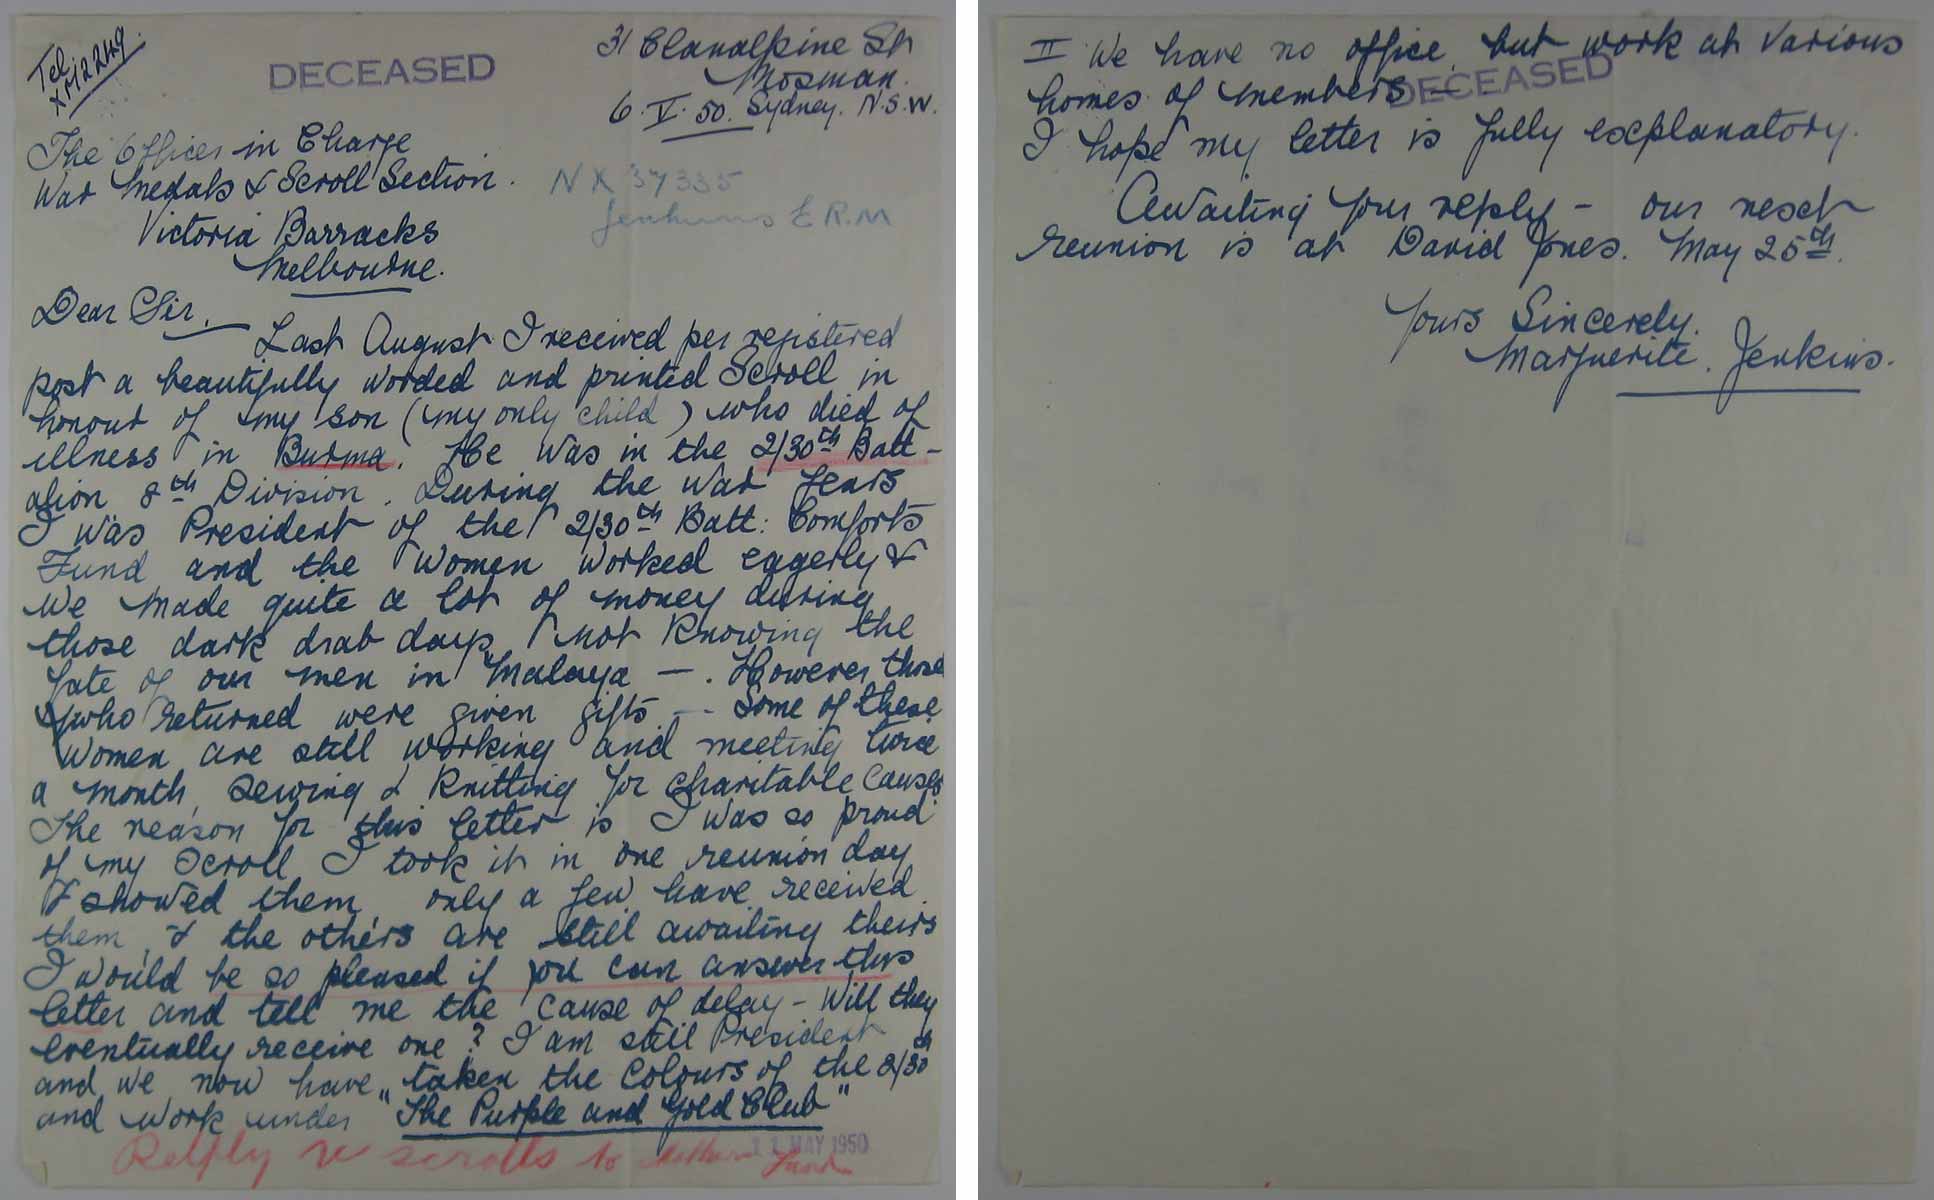 Letter No. 1 - 6/5/1950
Letter to Victoria Barracks from Mrs. Marguerite JENKINS regarding a memorial scroll for her son, NX37335 - L/Cpl. Edward Rossborough Melbourne (Bernie) JENKINS, and other POWs who did not return.
Keywords: 091122a